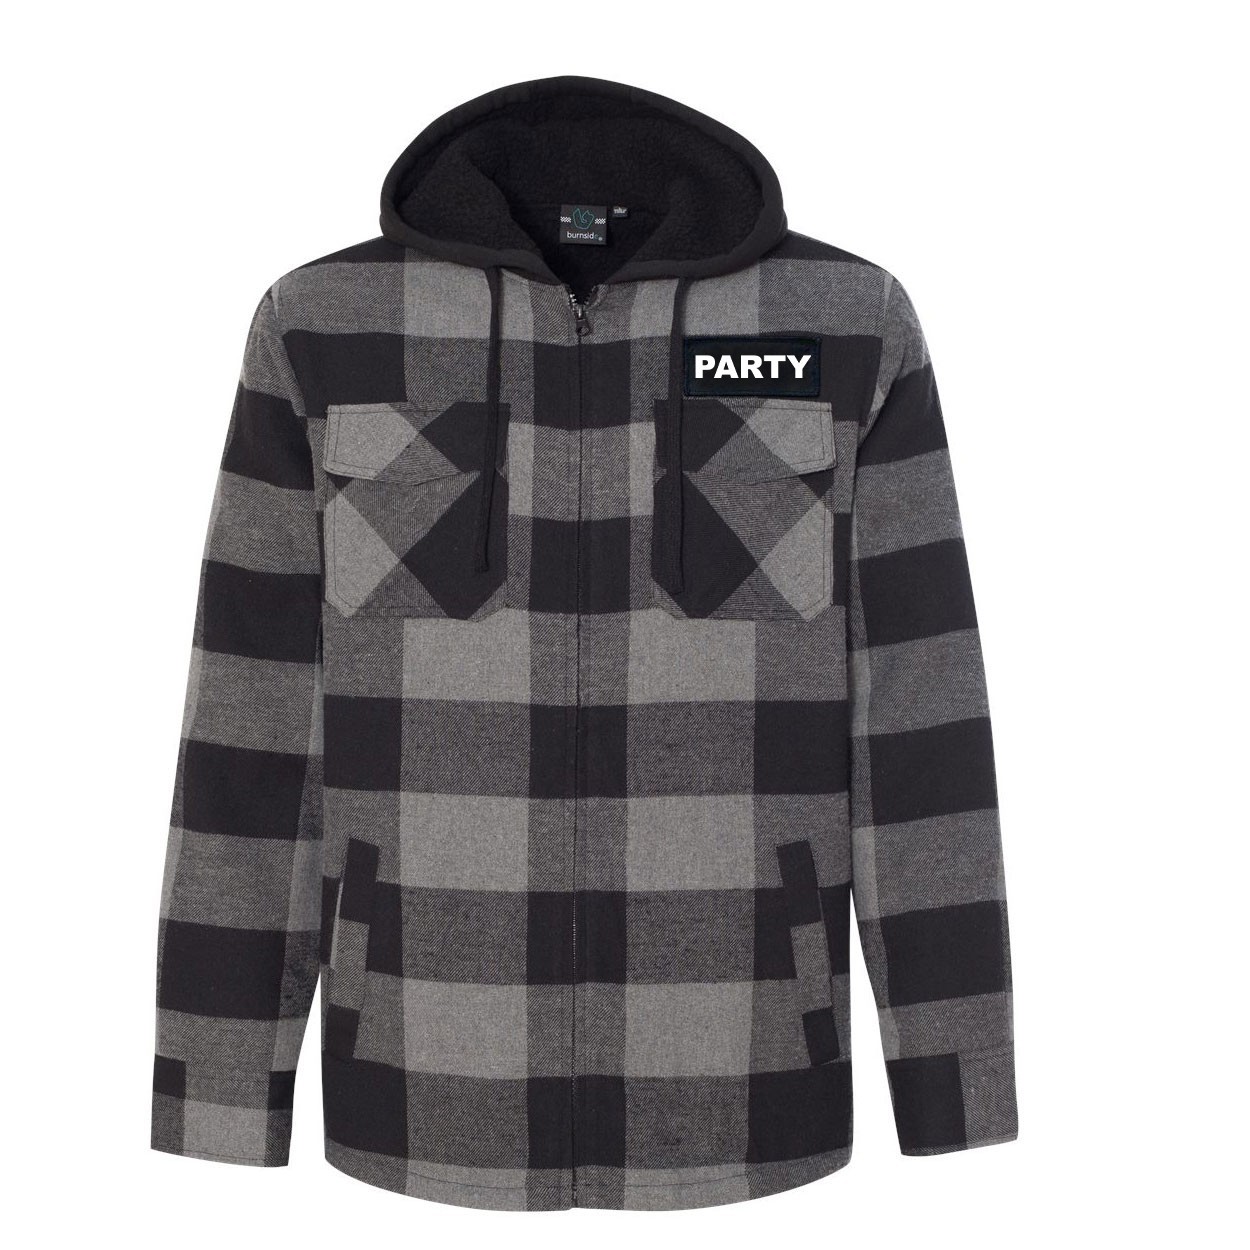 Party Brand Logo Classic Unisex Full Zip Woven Patch Hooded Flannel Jacket Black/Gray (White Logo)